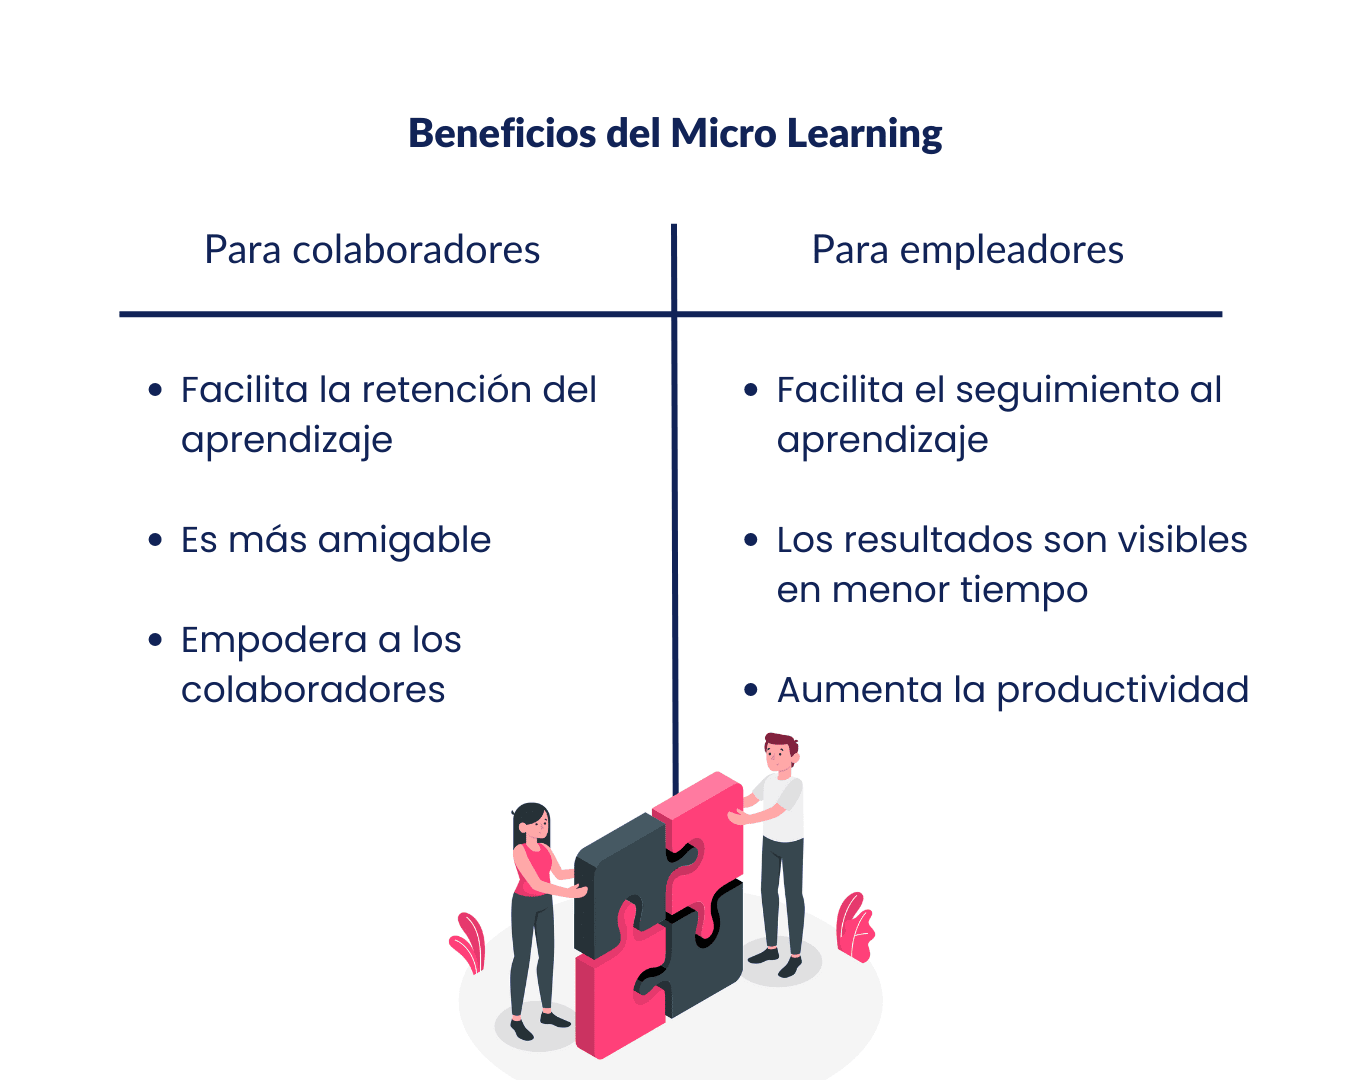 Summary table of the benefits of microlearning